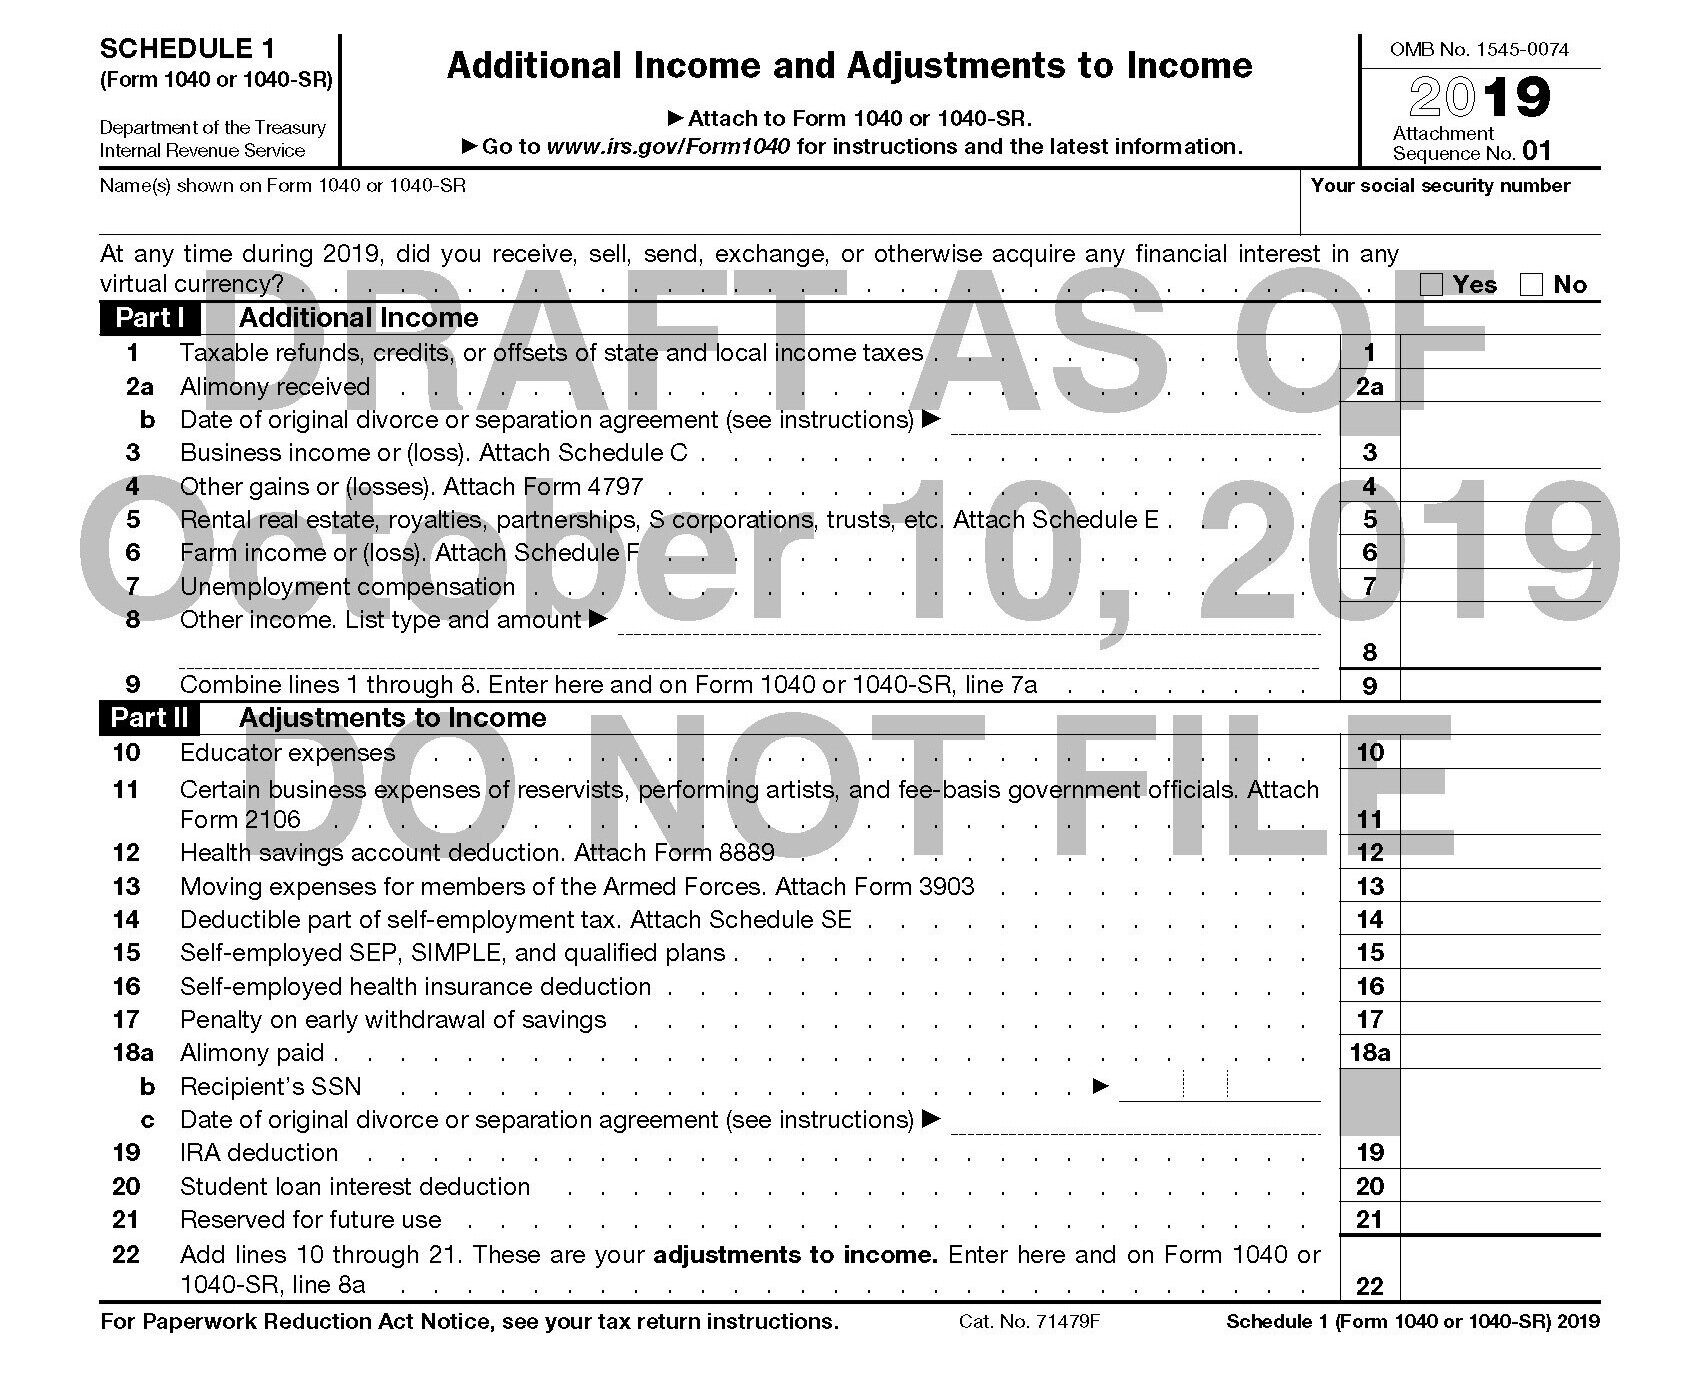 Irs 1040 Schedule 1 2022 2019 Form 1040 Schedule 1 Will Ask Taxpayers If They Have Had Virtual  Currency Transactions — Current Federal Tax Developments